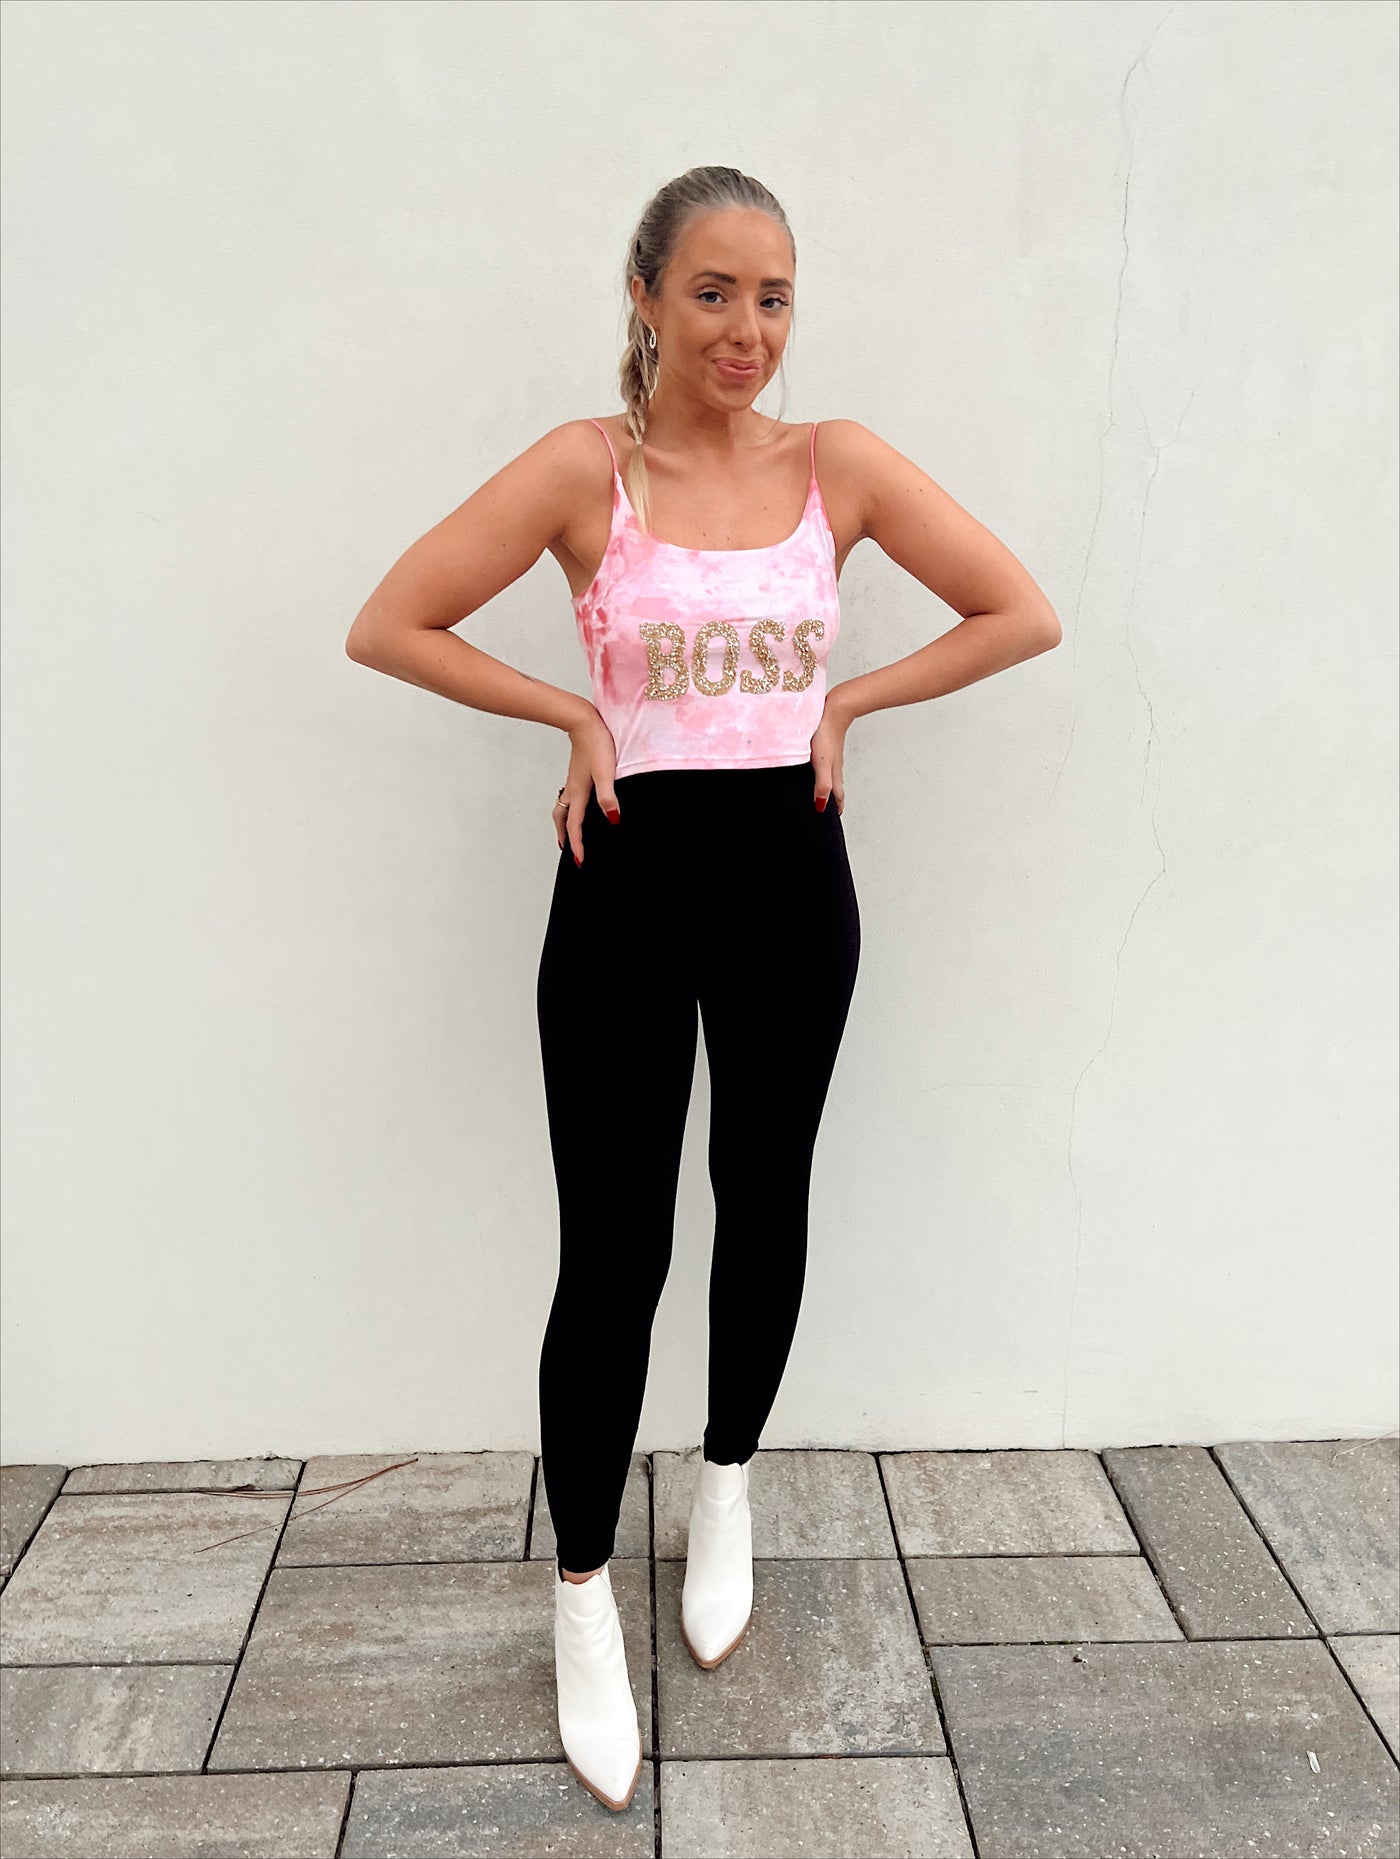 Boss Babe Sparkled Letter Crop Tank